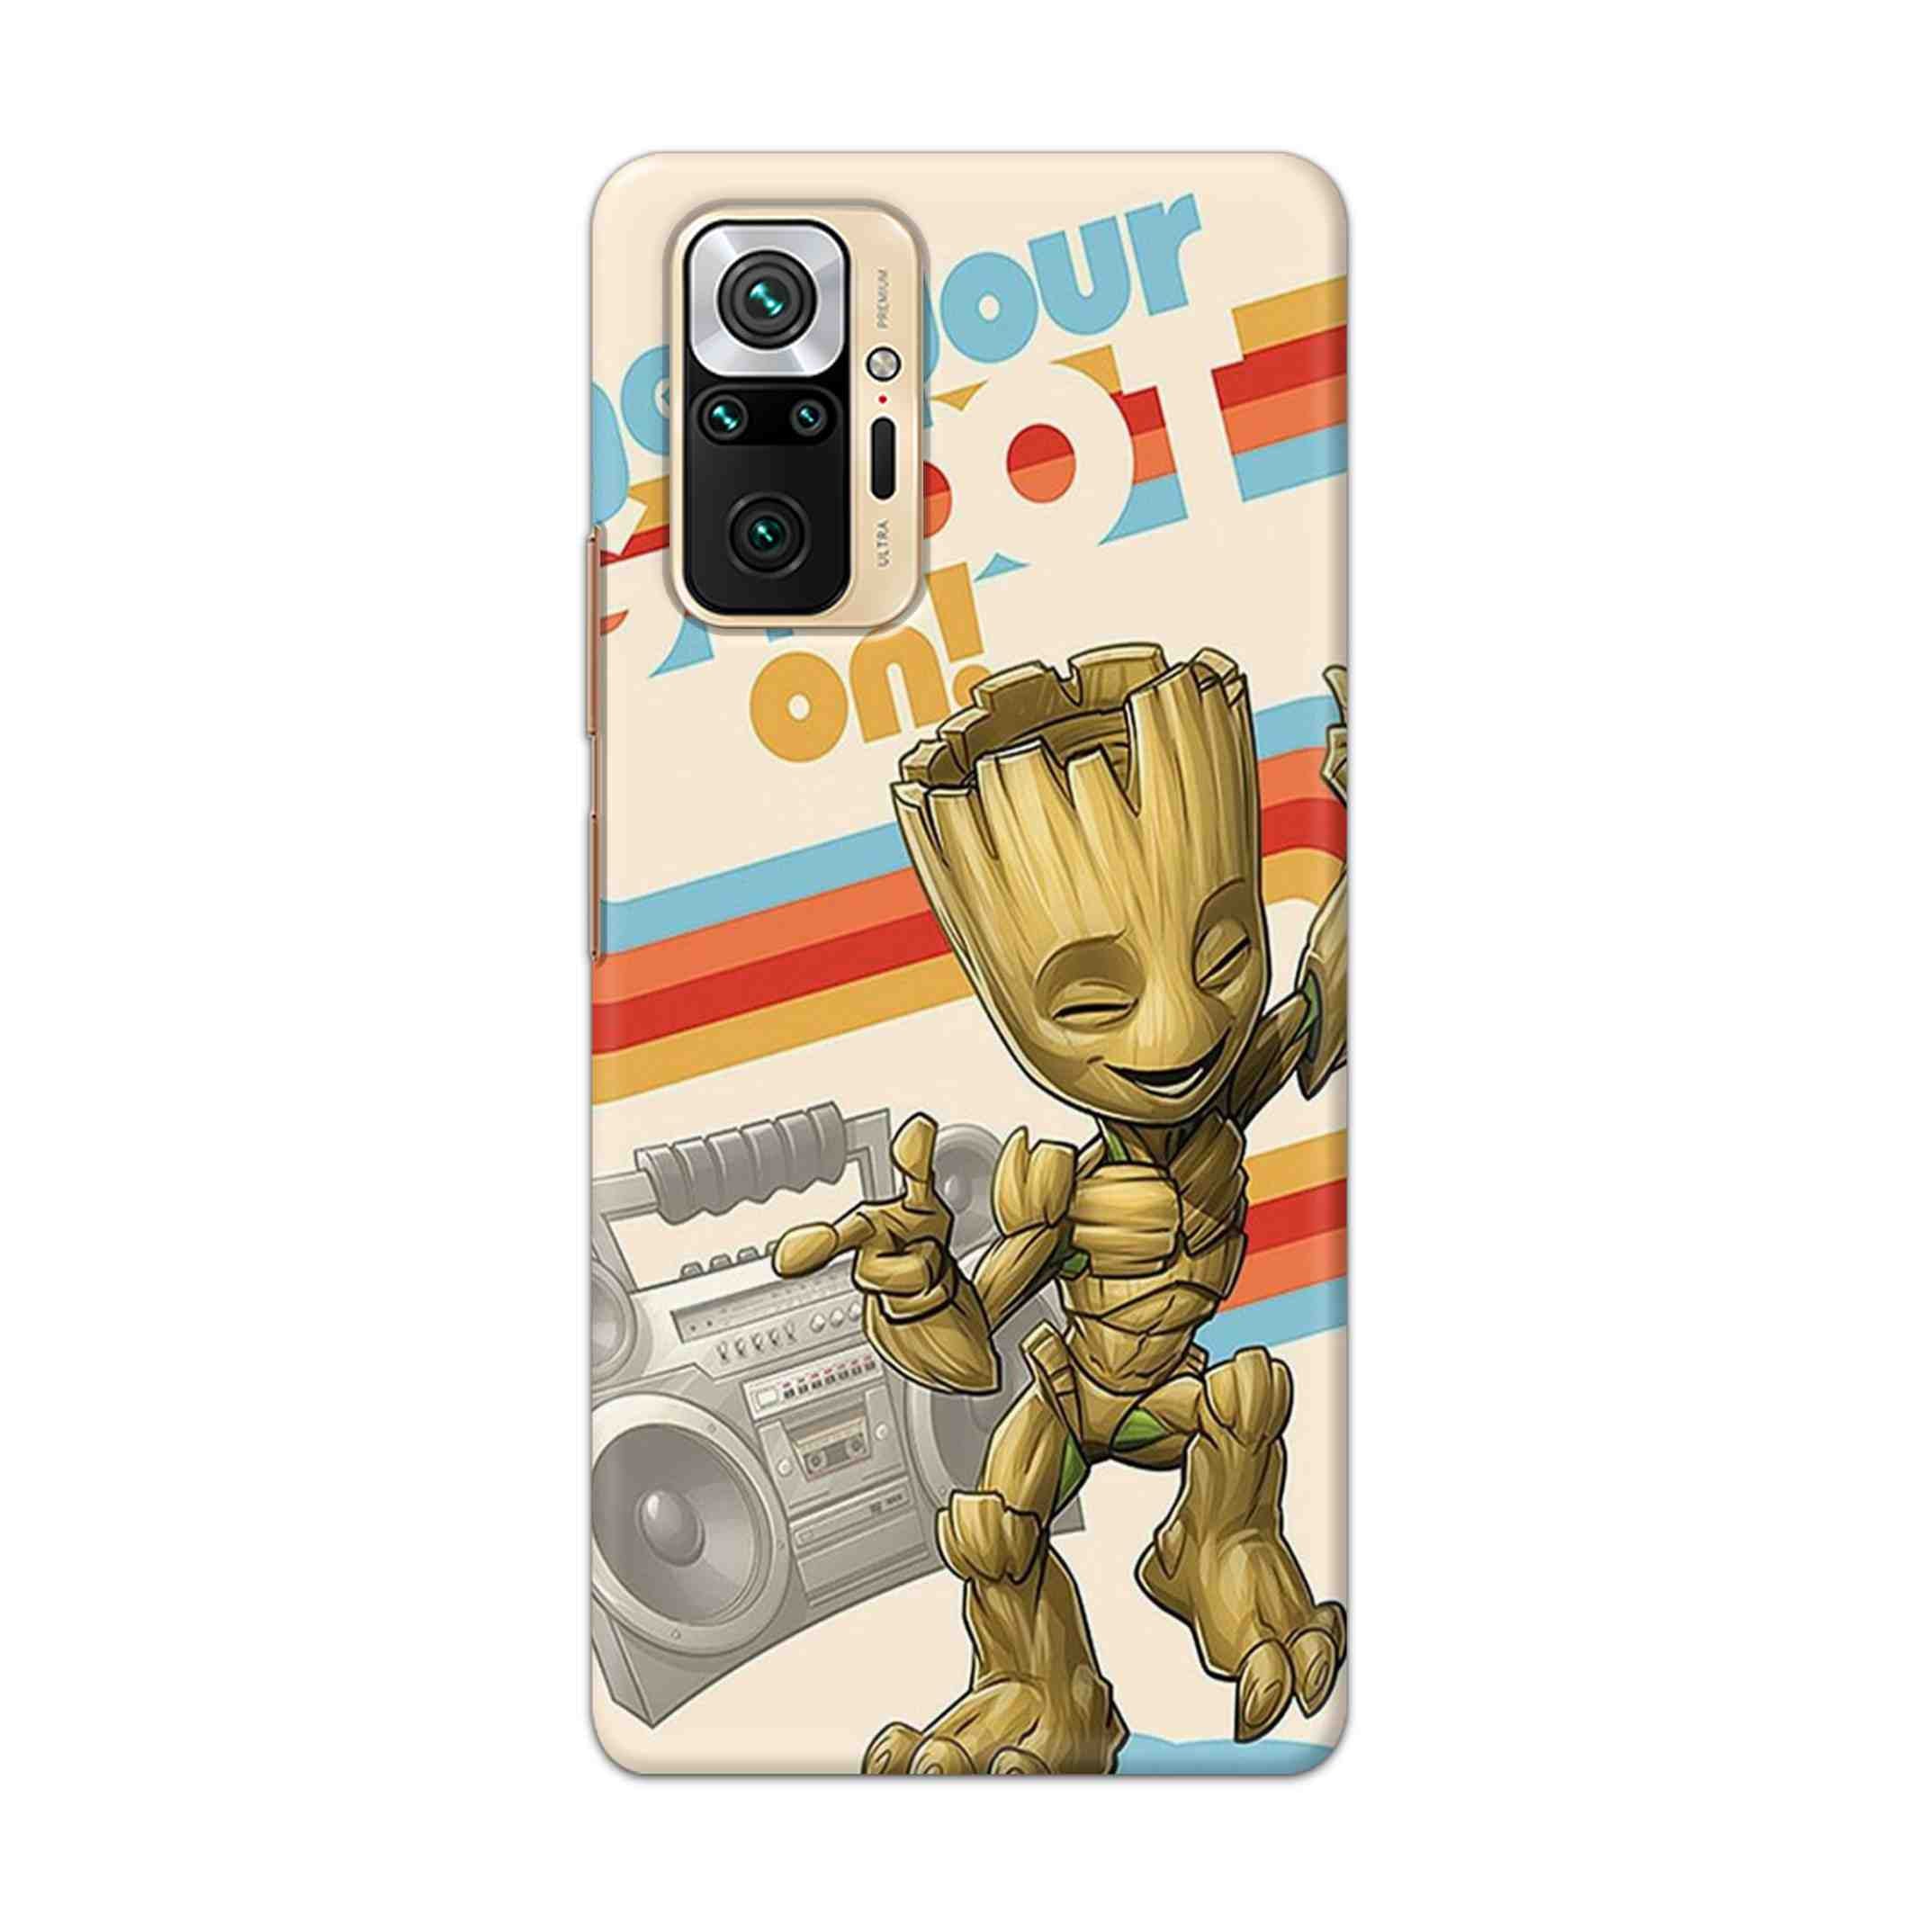 Buy Groot Hard Back Mobile Phone Case Cover For Redmi Note 10 Pro Online